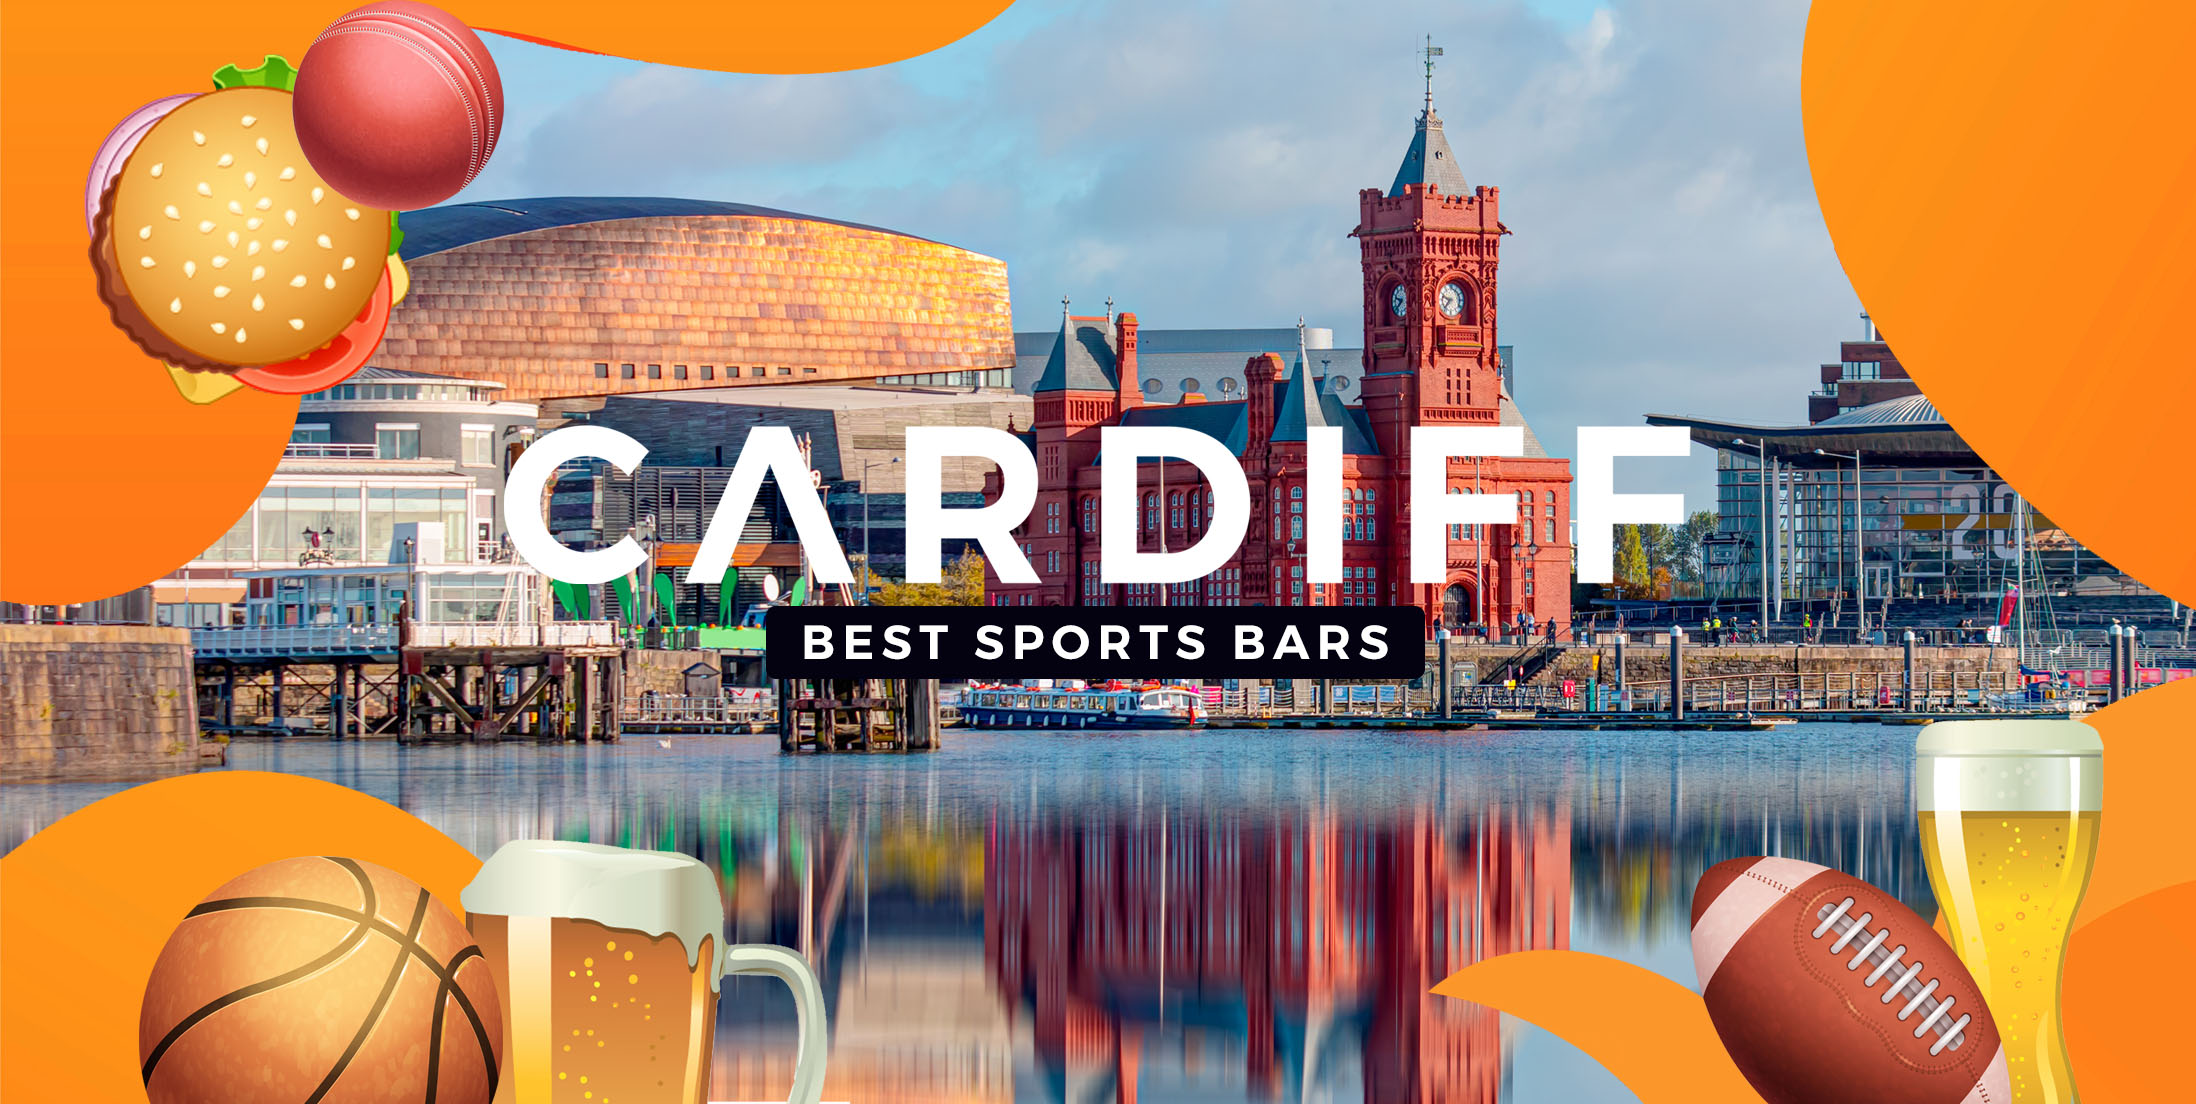 The Best Sports Bars in Cardiff